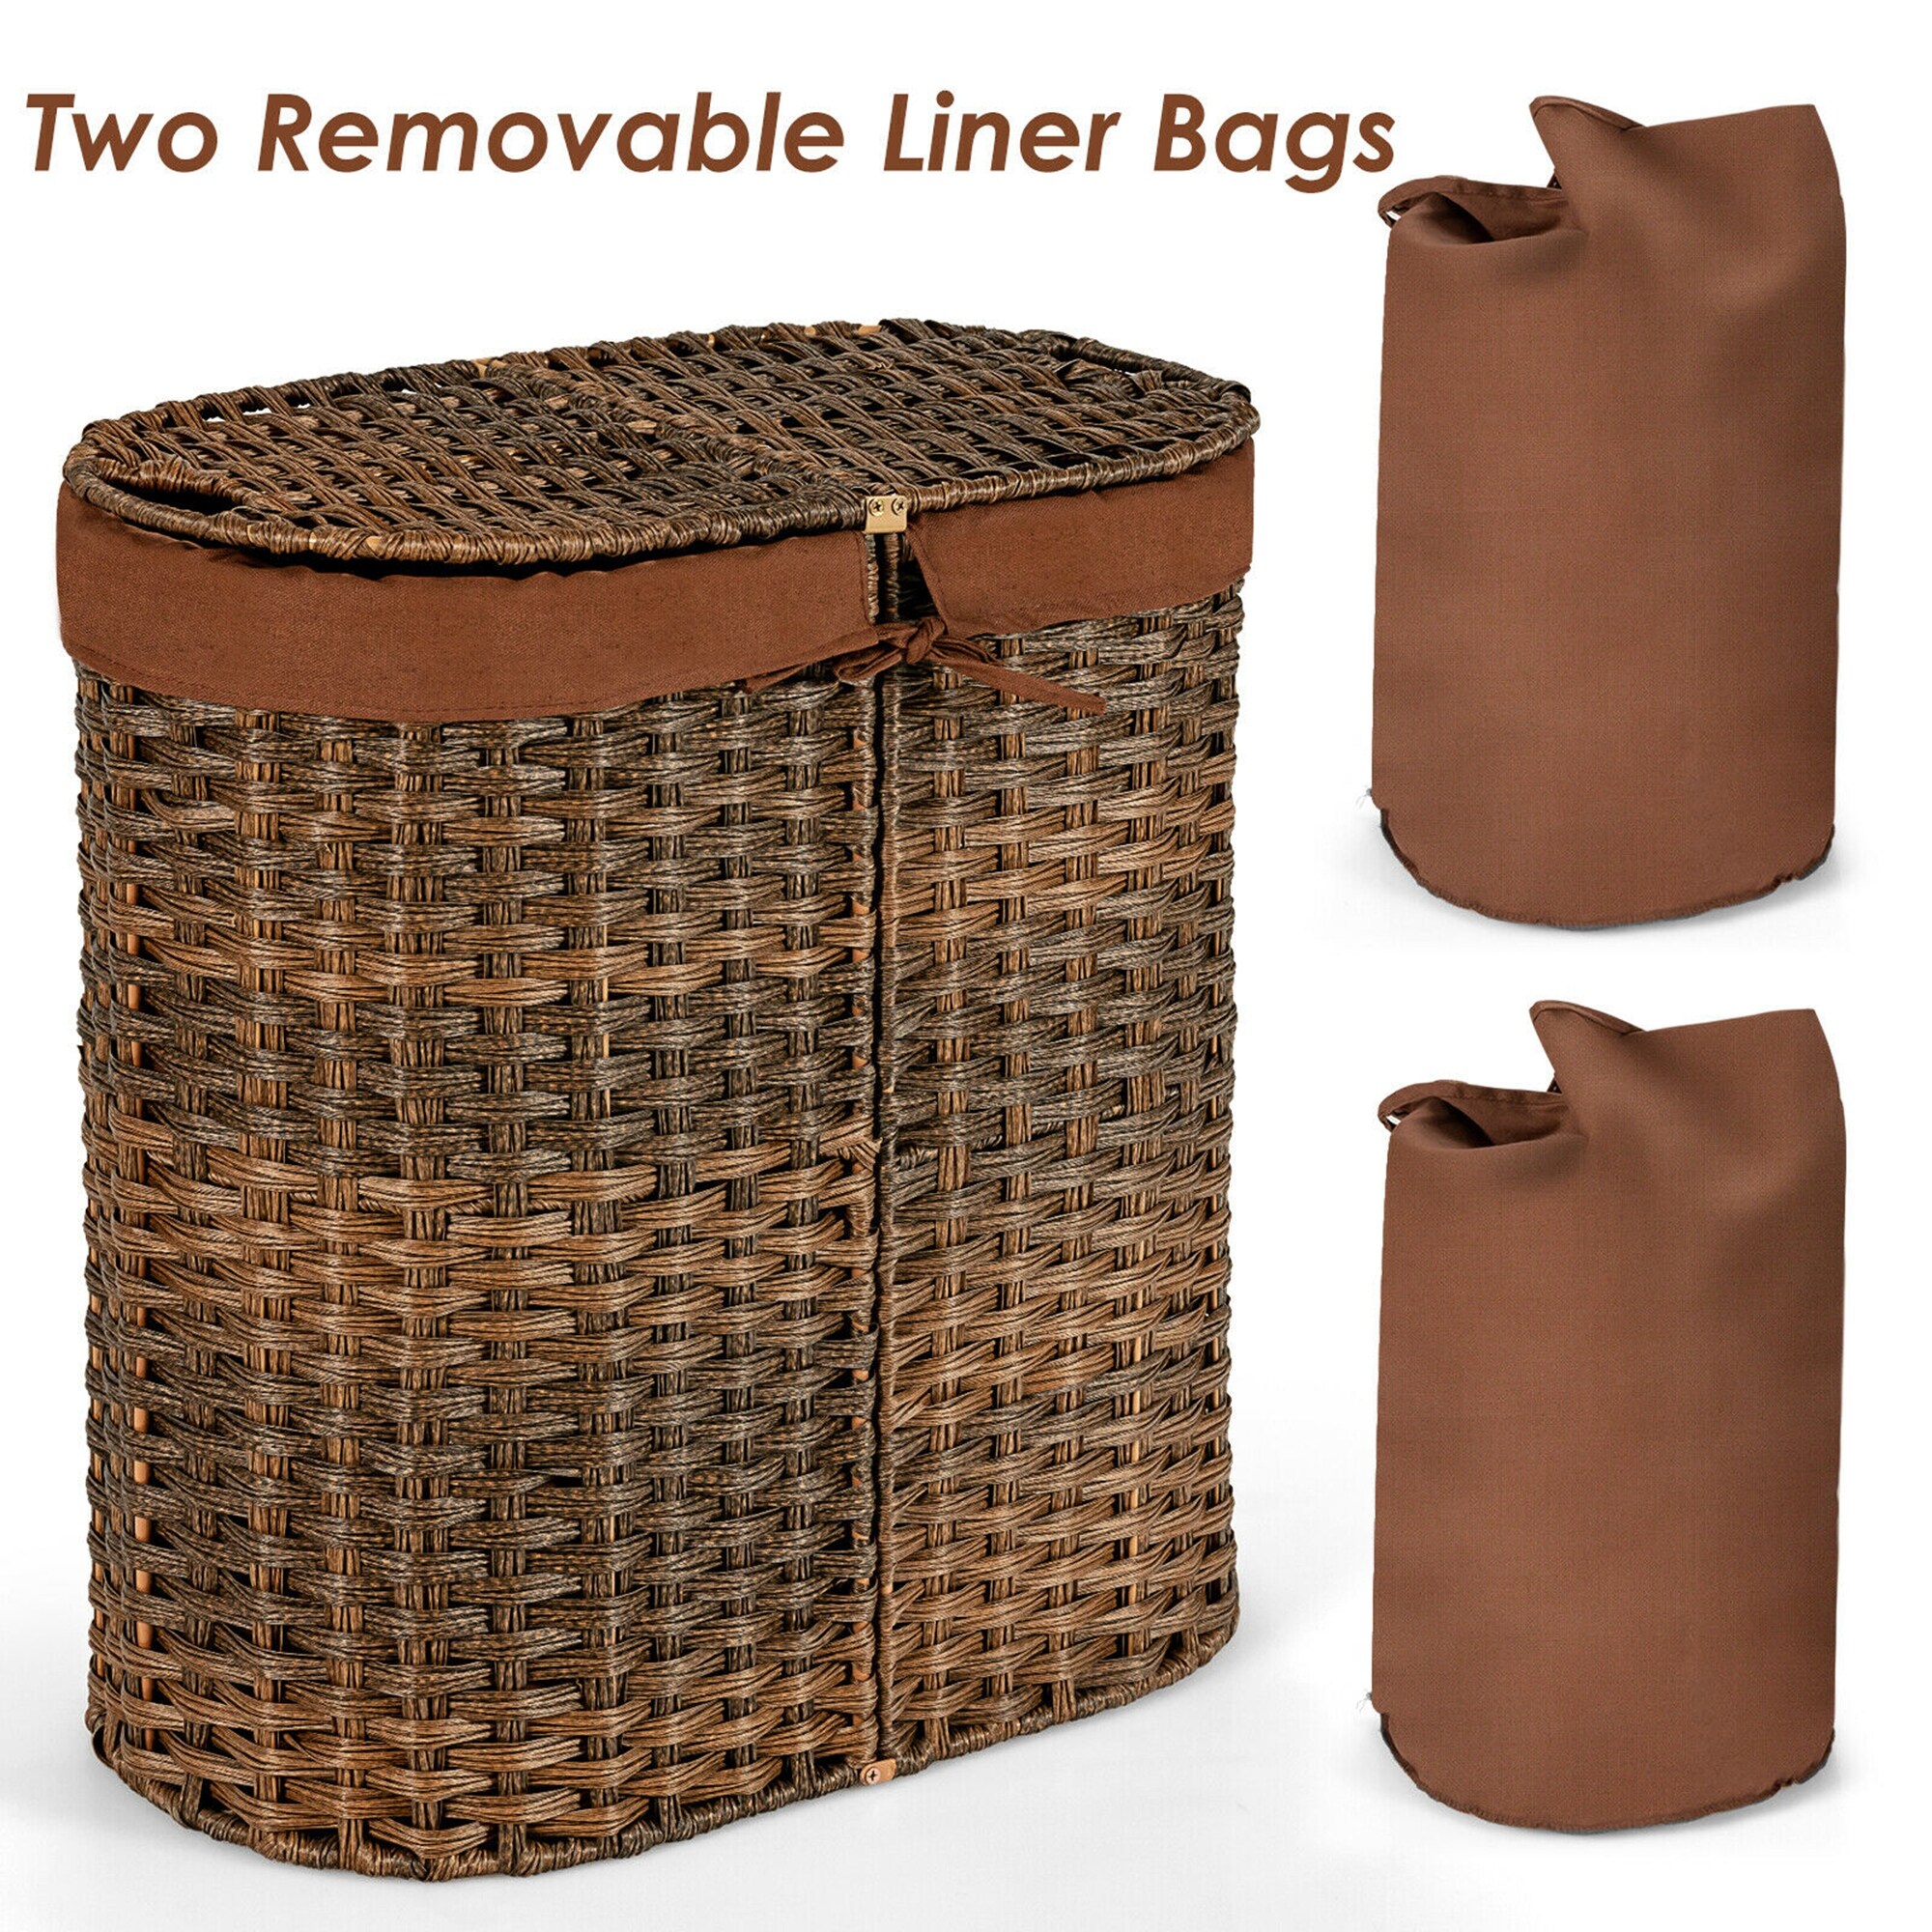 Gymax Handwoven Laundry Hamper Laundry Basket w/2 Removable Liner Bags - 24'' x 13.5'' x 24.5''